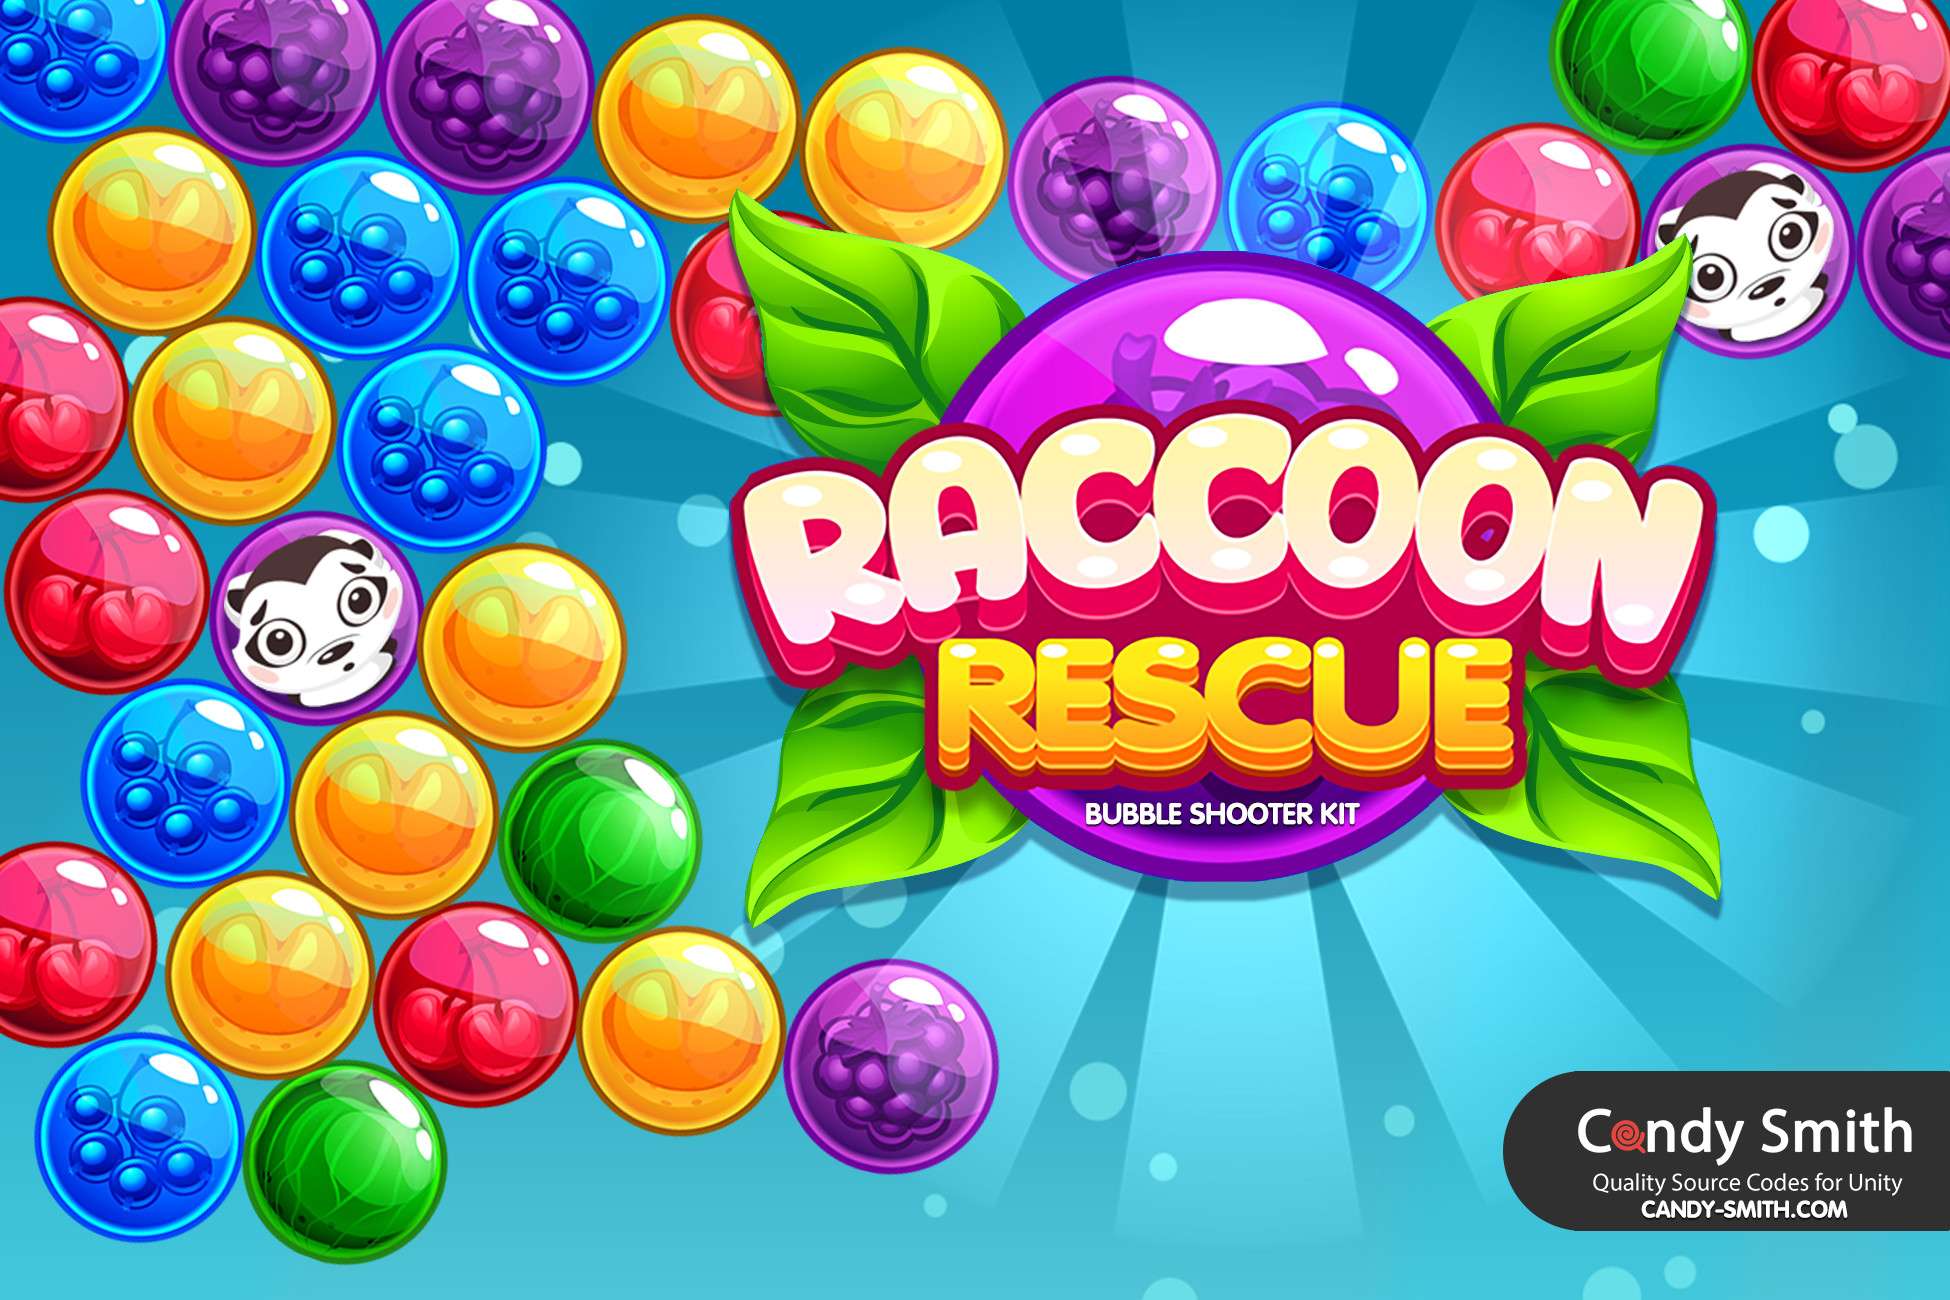 free bubble shooter download full version